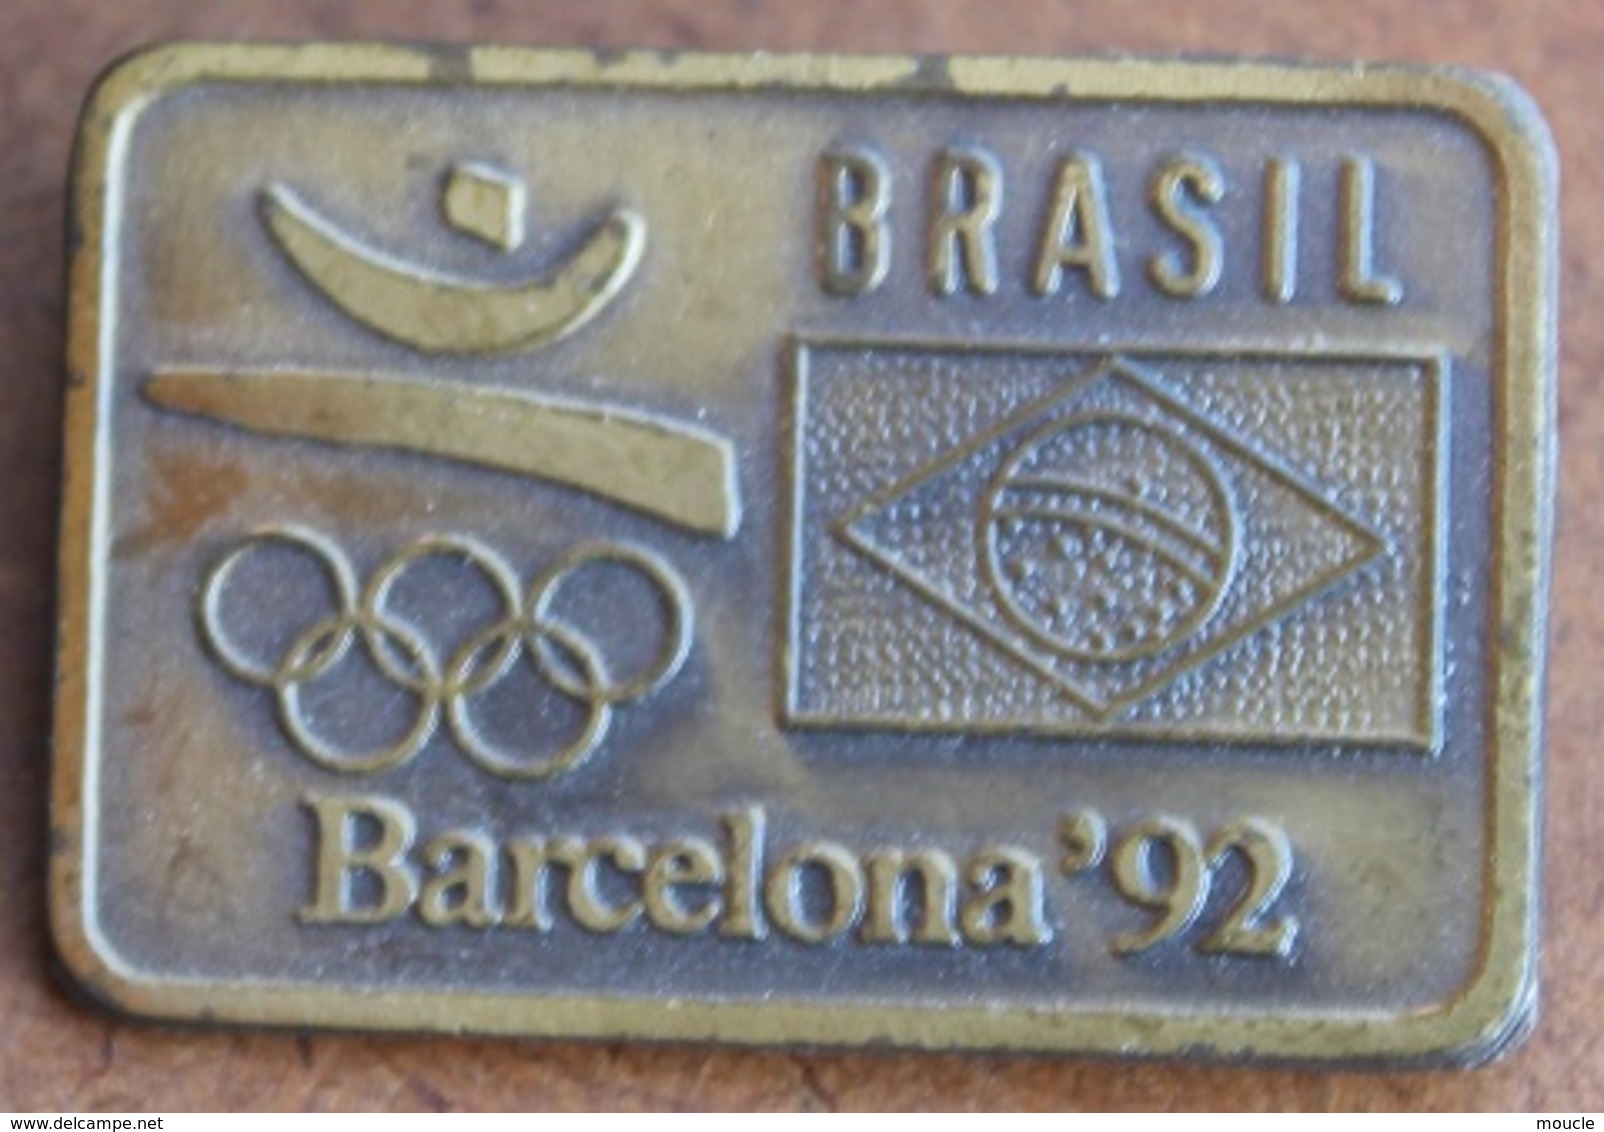 ATTENTION C'EST UNE BROCHE - SPINDEL - BROOCH -  JEUX OLYMPIQUES BARCELONA 92 - BRASIL OLYMPIC TEAM - BRESIL - Jeux Olympiques